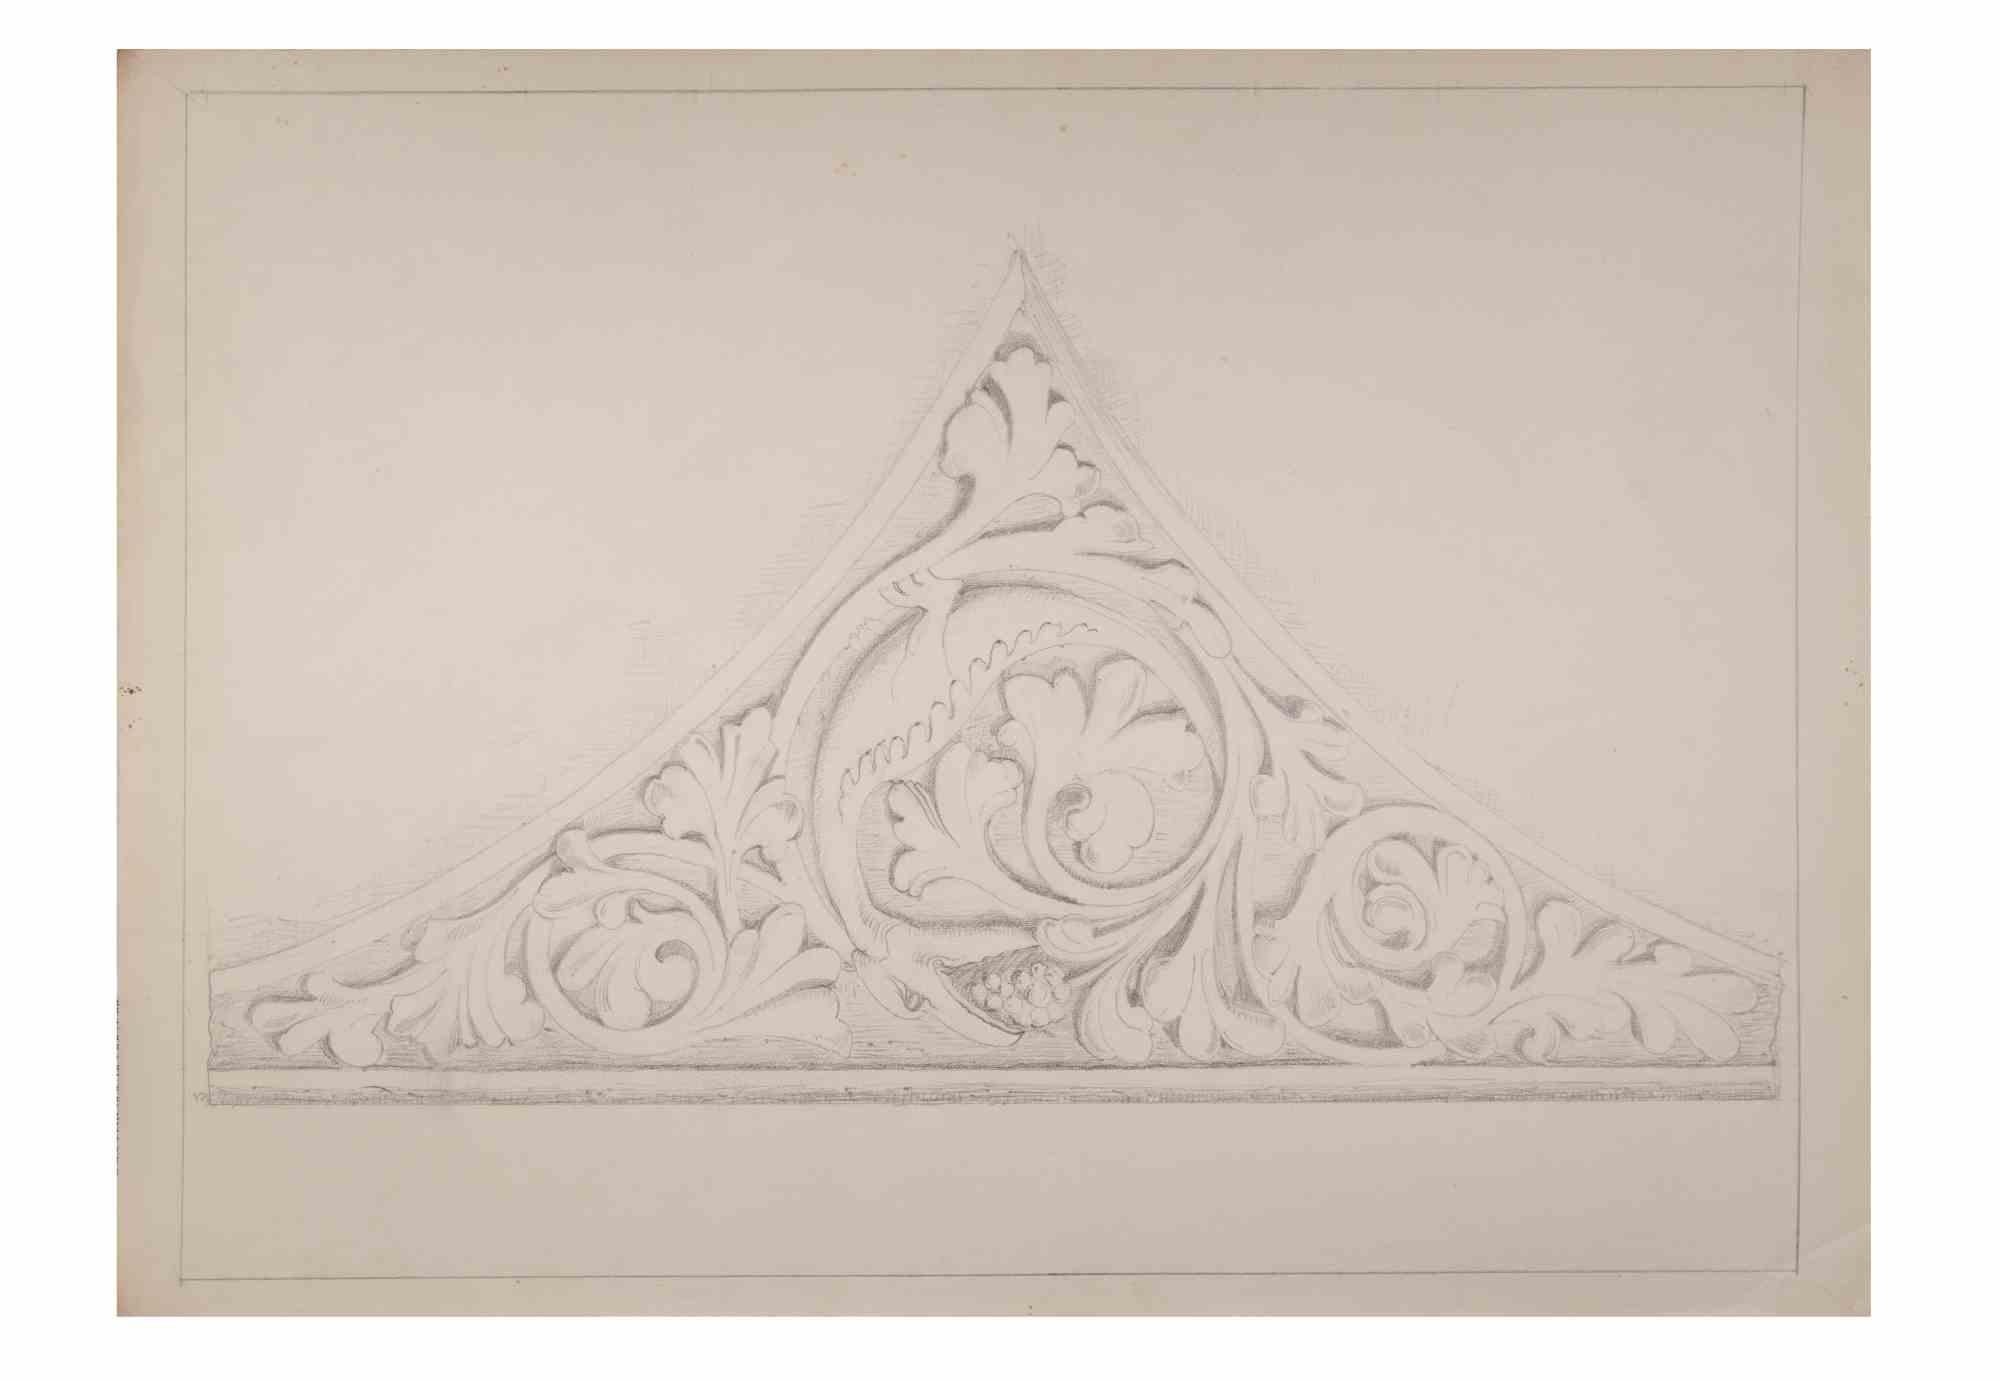 Decorative motif  is an Artwork realized by the Italian Artist Aurelio Mistruzzi in 1905.

Pencil Drawing on paper.

Good conditions.

Aurelio Mistruzzi (1880-1960) studied at the Udine Art School, having classes with the Sculptor De Paoli. He moved